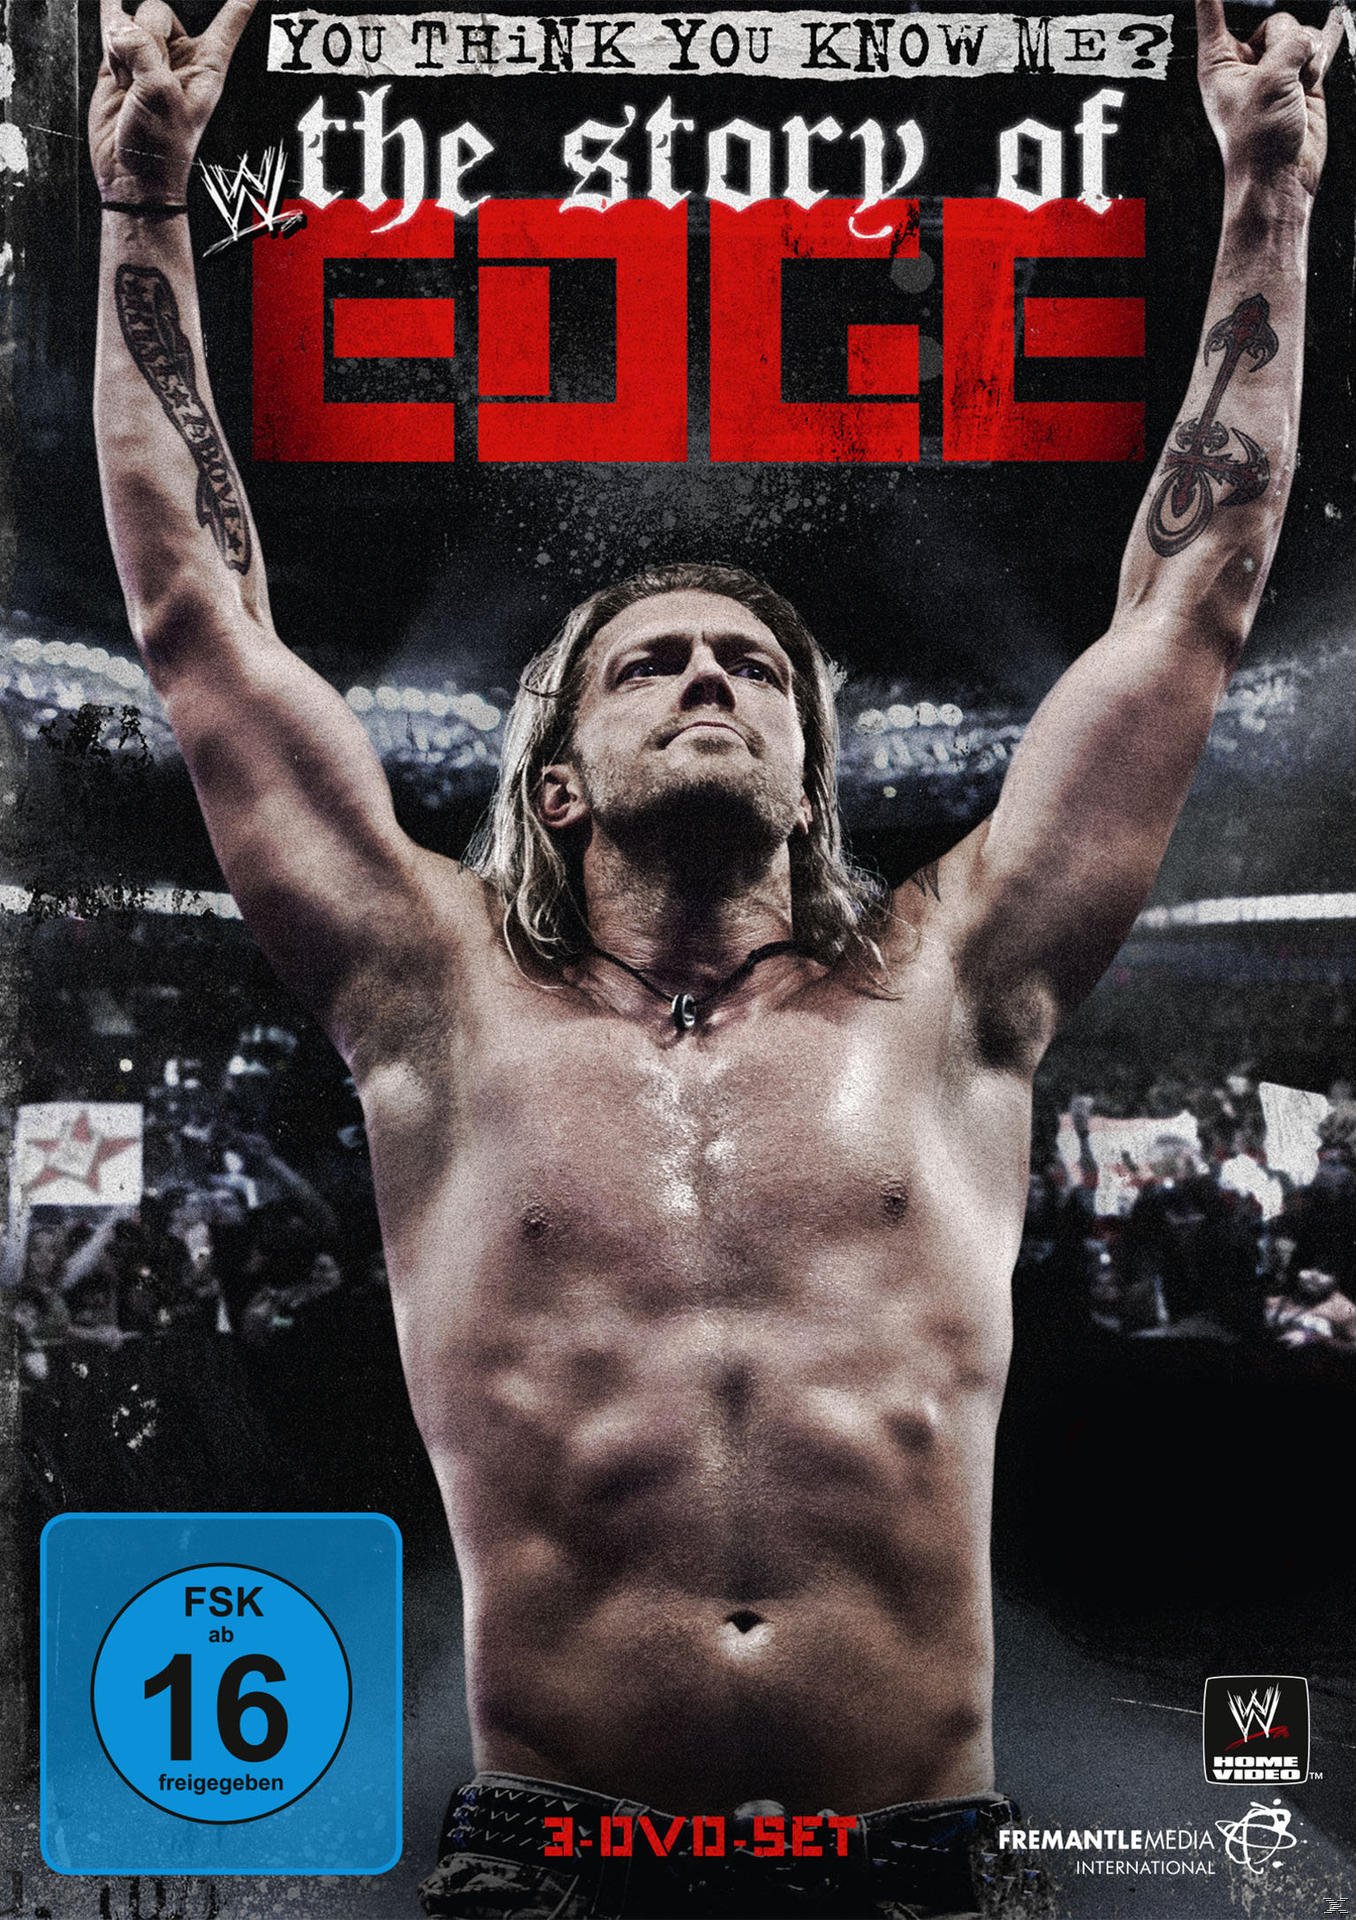 Me? You - You The Story Edge of DVD Know Think WWE